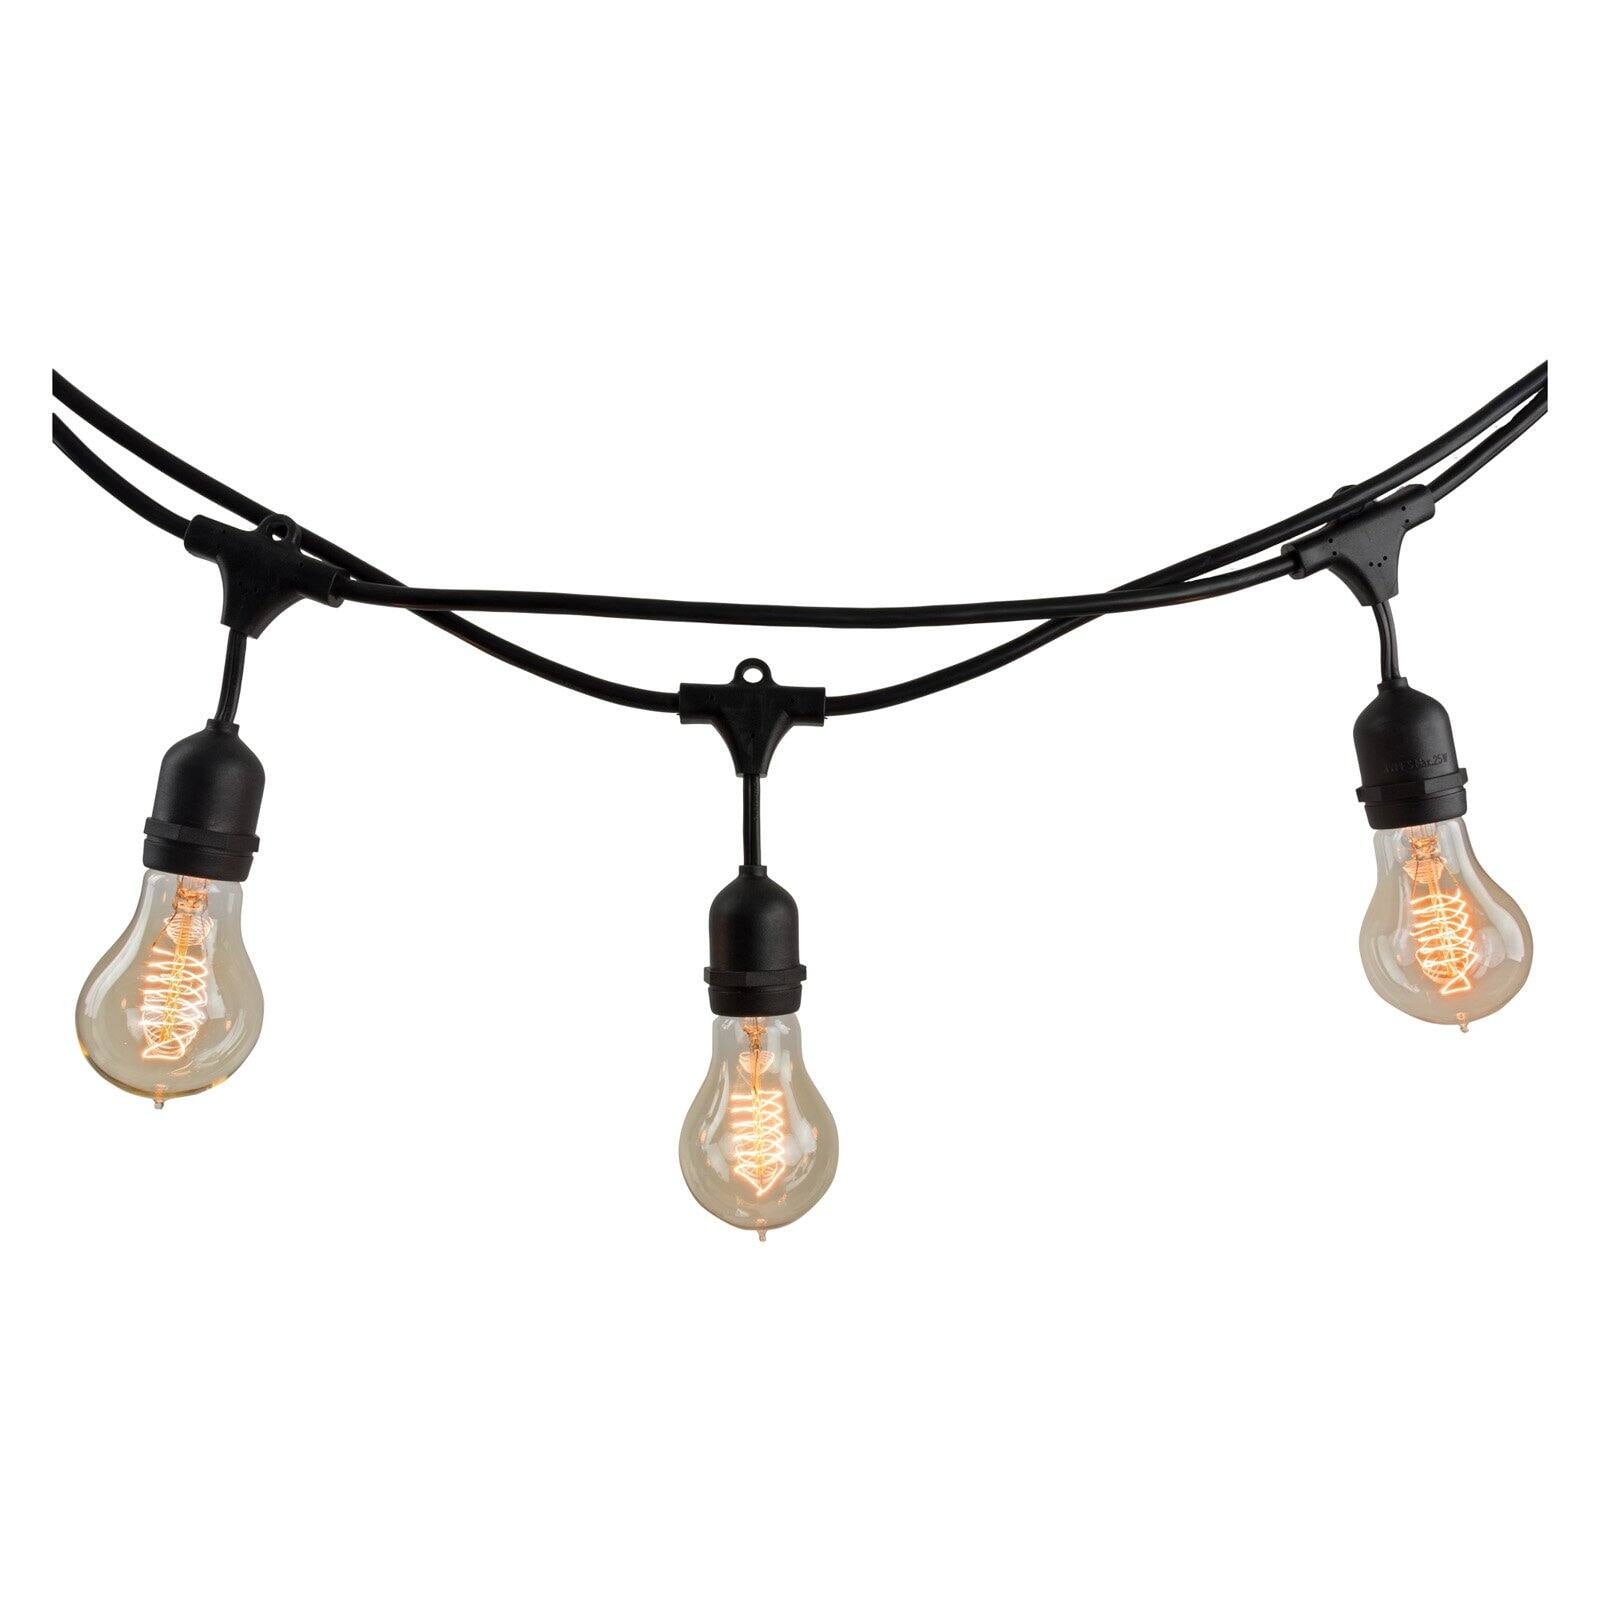 Picture of Bulbrite 14 ft  10-Socket (E26) Decorative String Light Kit with Clear Incandescent (S14) Bulbs  11 Watt  Black